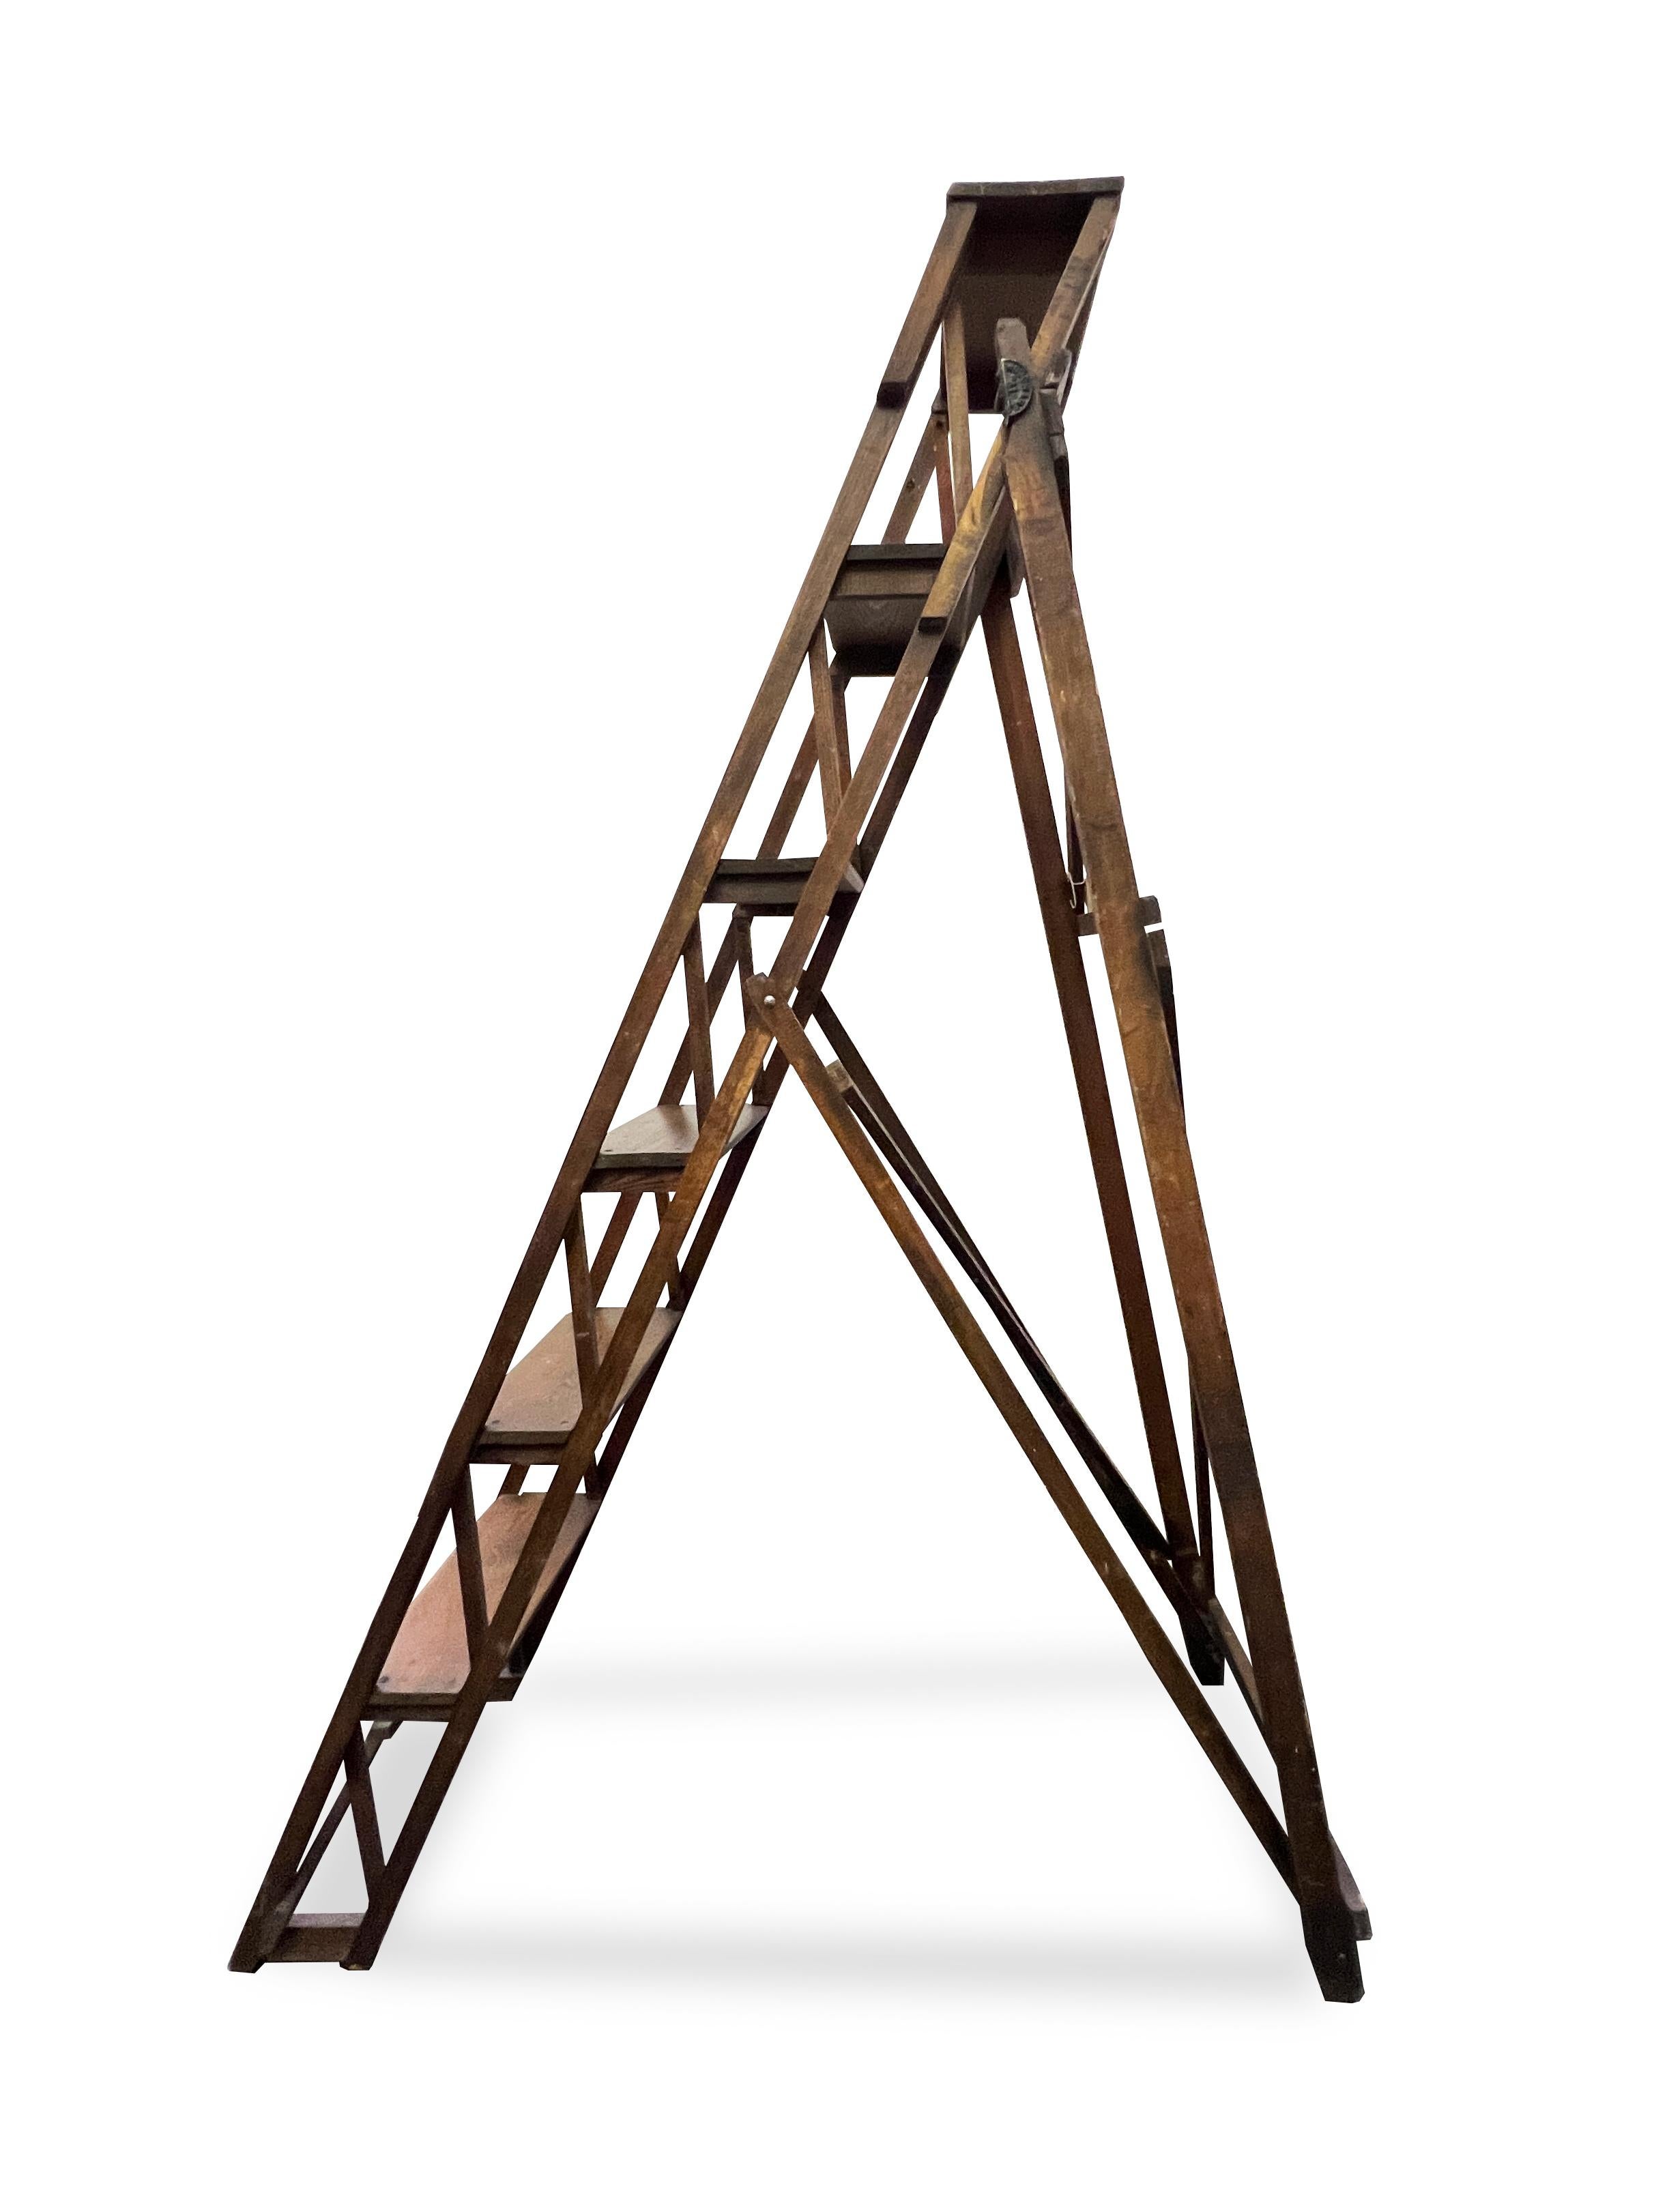 Wood architecturable foldable step ladder. Made in England. Circa 1970. Beautiful piece in great condition. Perfect addition to a home library. 

Dimensions Closed: W 20.125